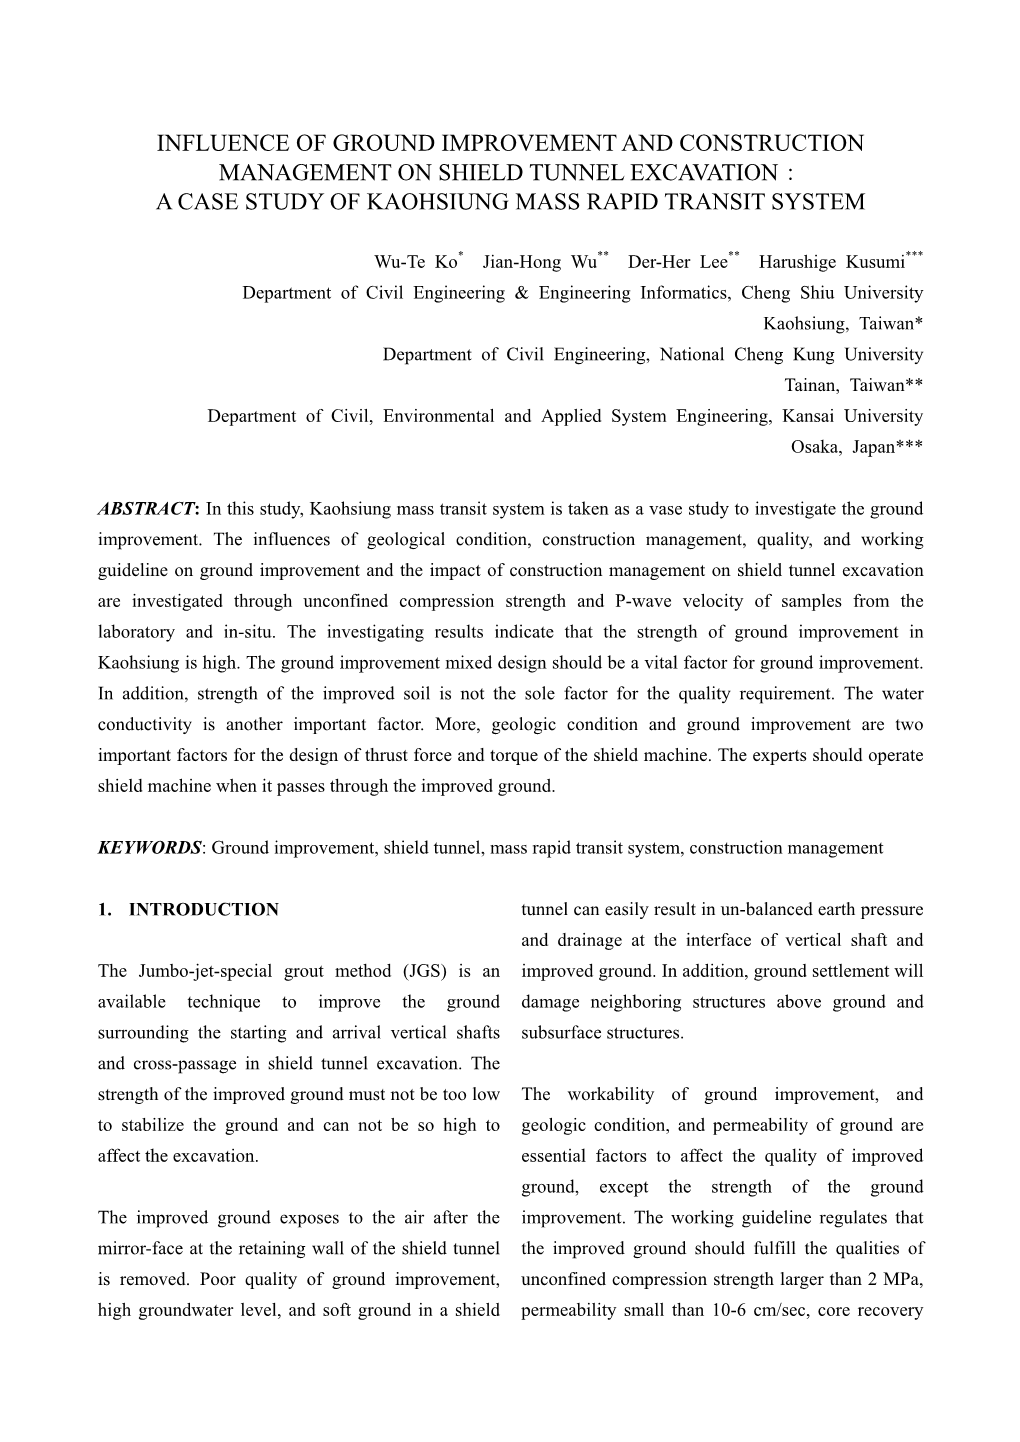 Influence of Ground Improvement and Construction Management on Shield Tunnel Excavation： a Case Study of Kaohsiung Mass Rapid Transit System